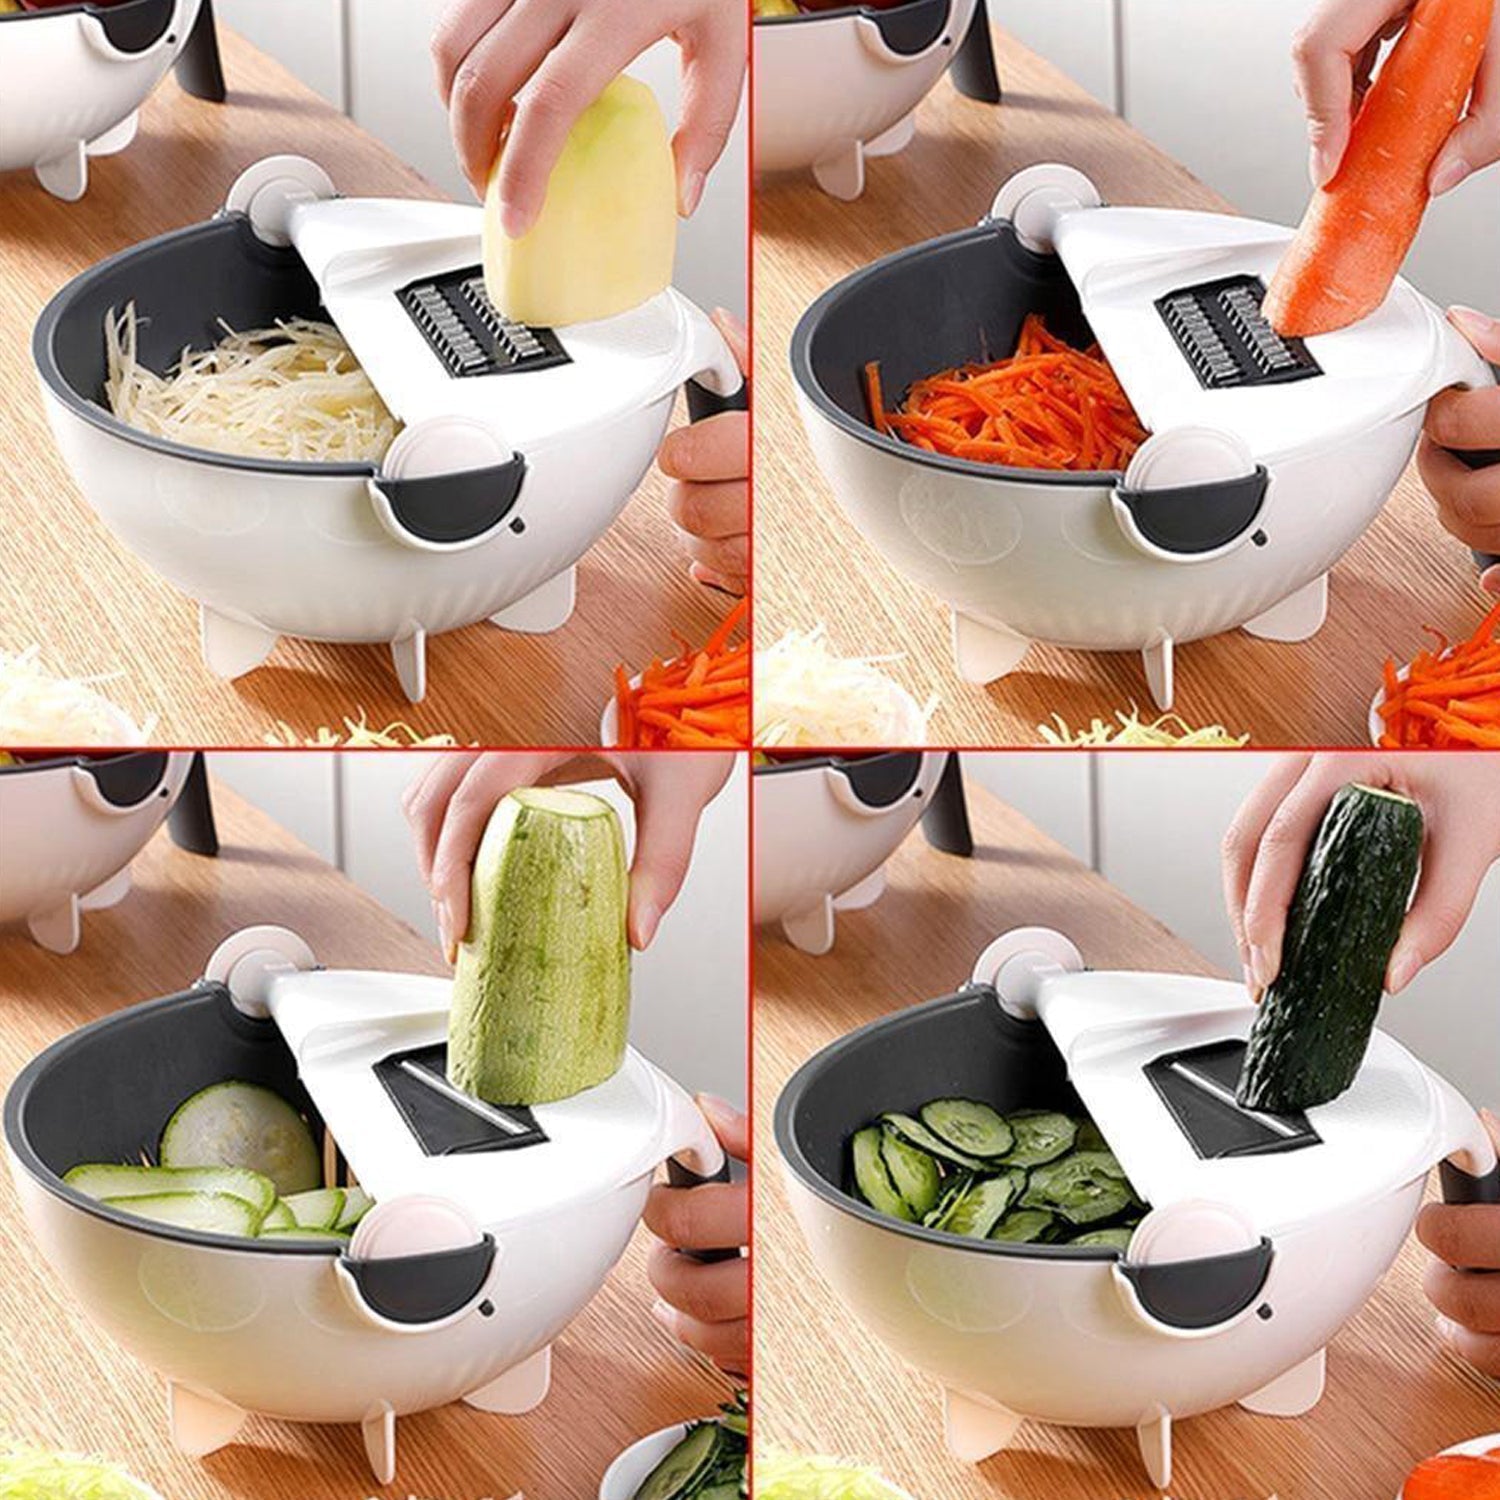 2187B Premium Portable 7 in 1 Multifunction Magic Rotate Vegetable Cutter/Chopper/Slicer/Shredder with Drain Basket with various Dicing Blades freeshipping - DeoDap